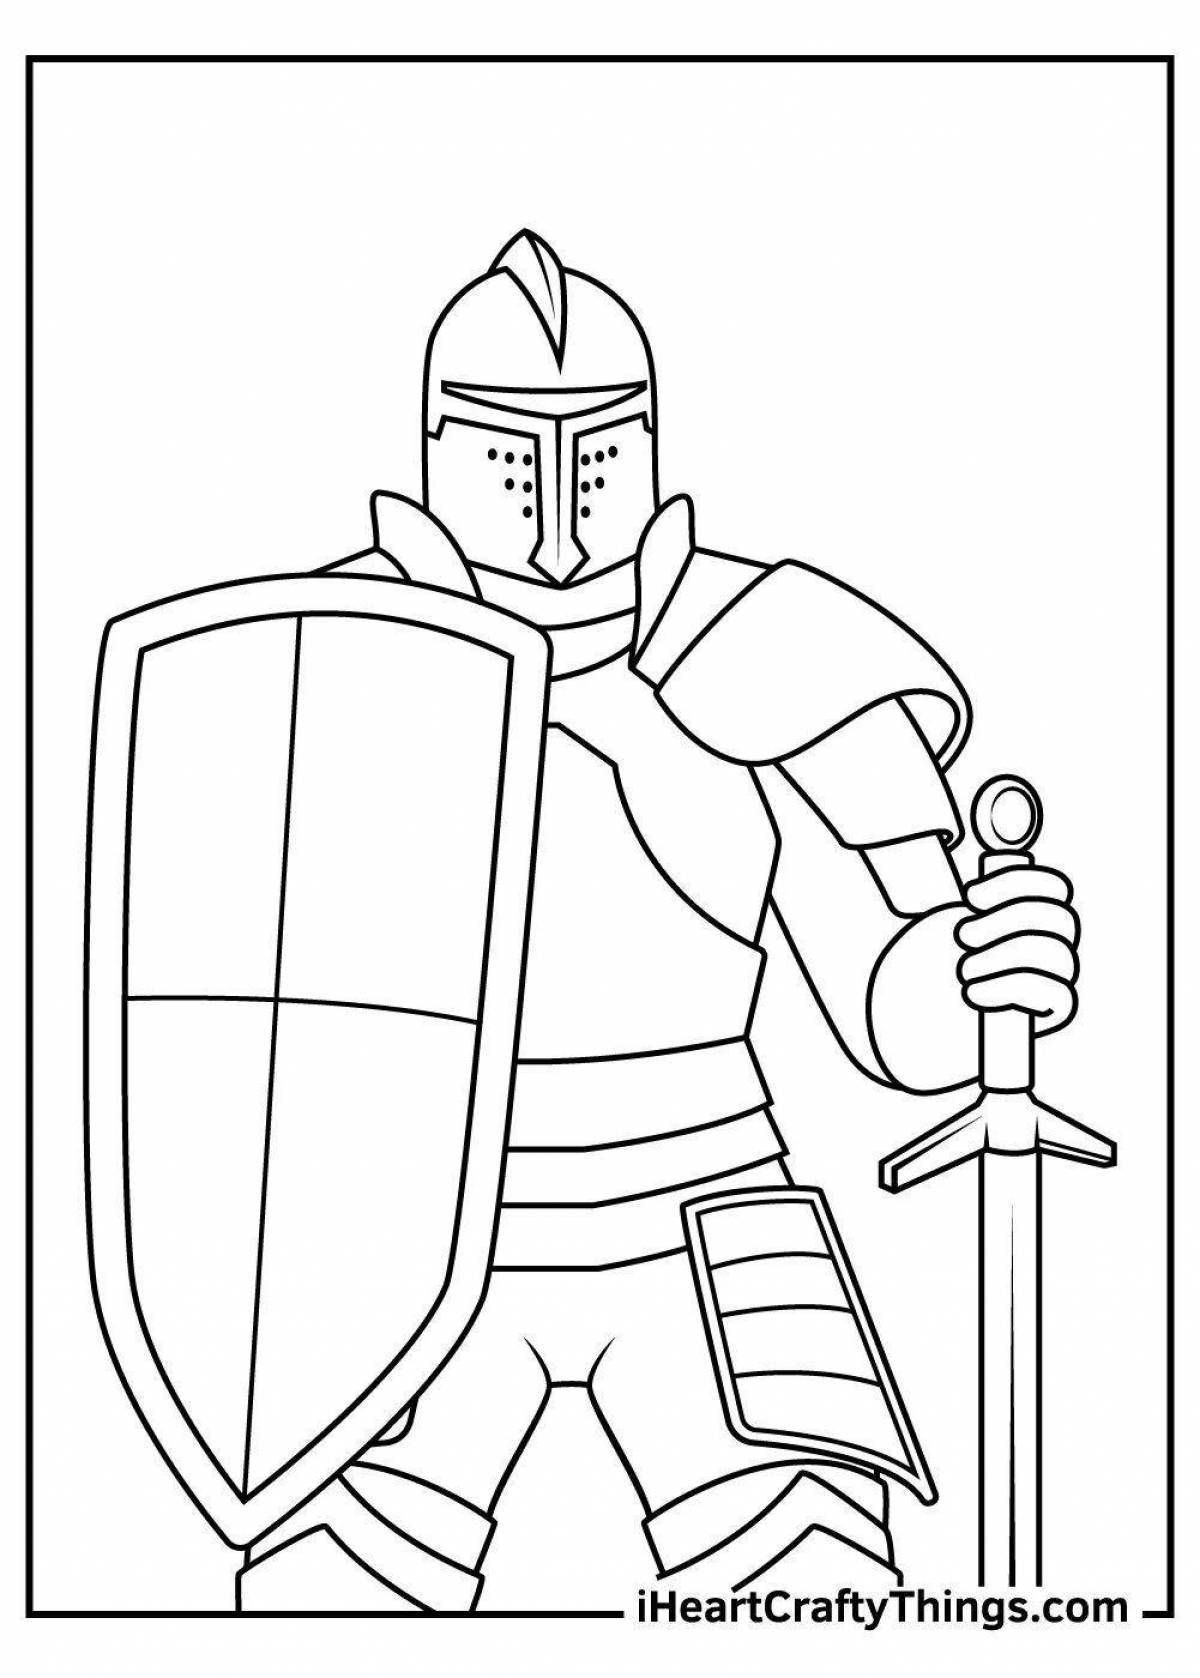 Coloring book for knight boys